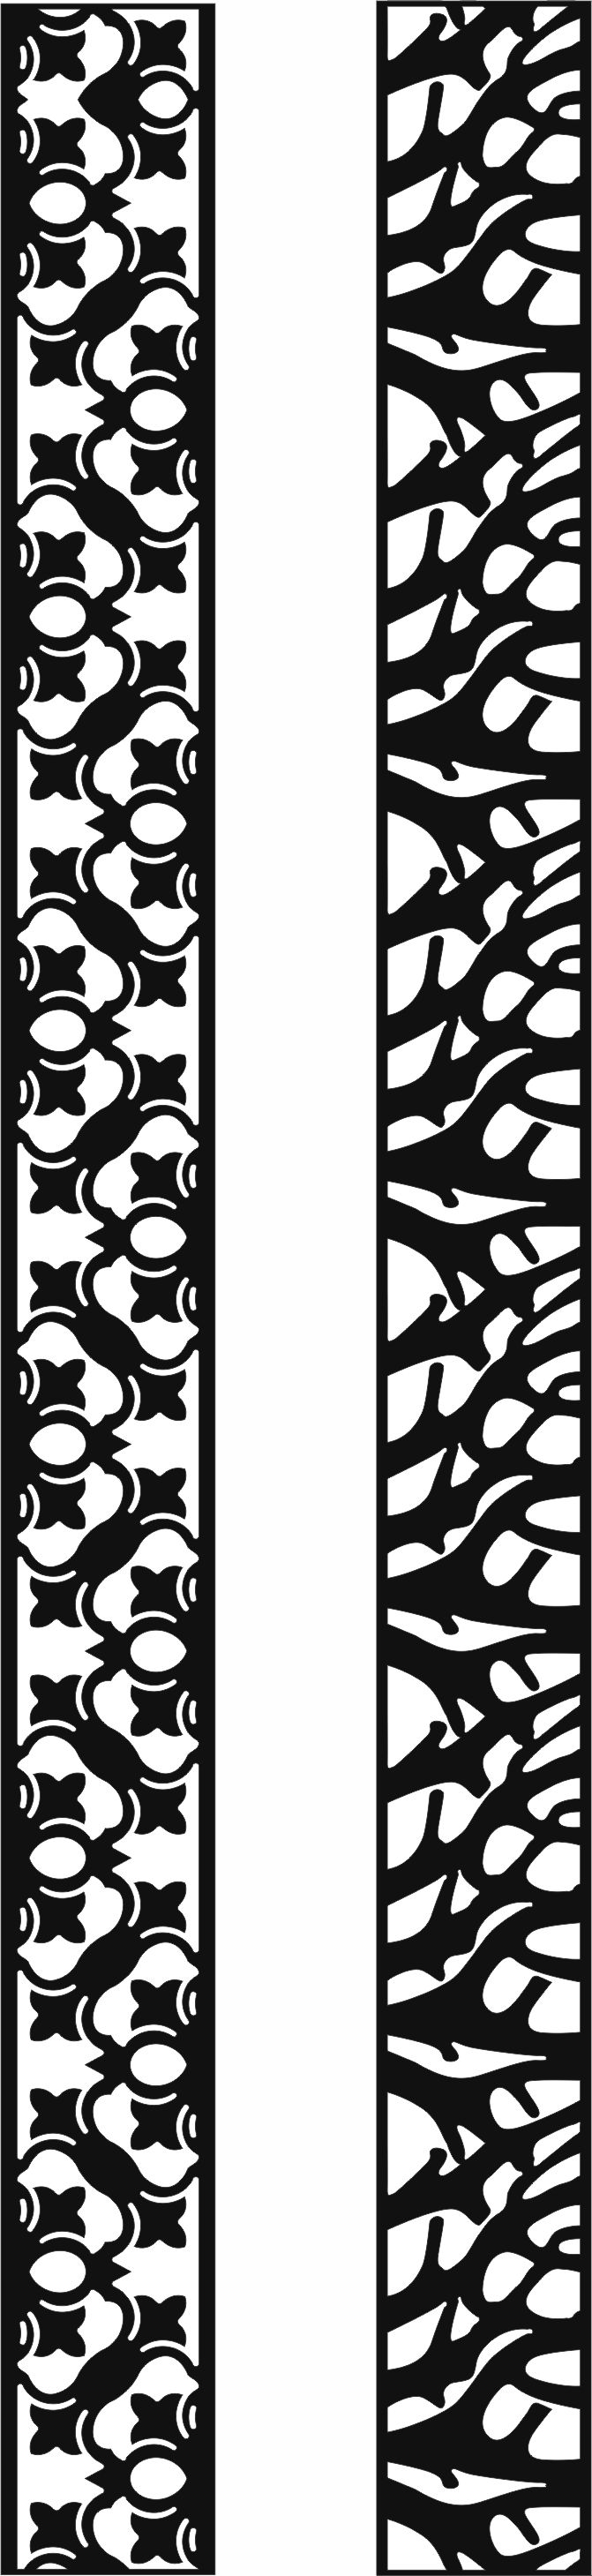 Divider Seamless Floral Screen Panel Free DXF File